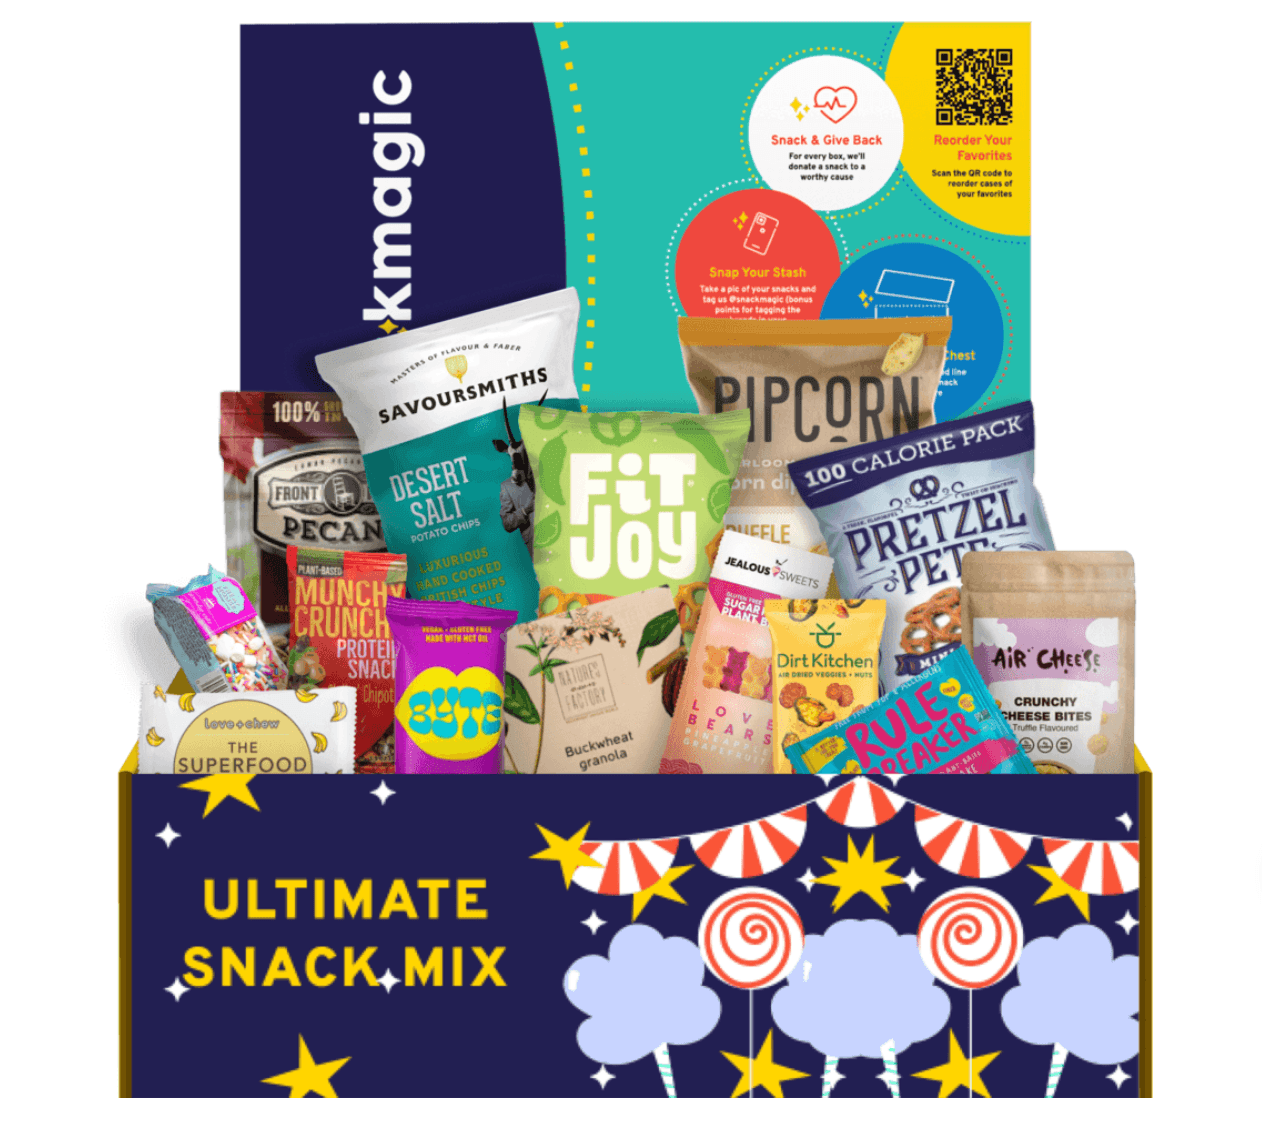 SnackMagic boxes make great Manager Appreciation Day gifts